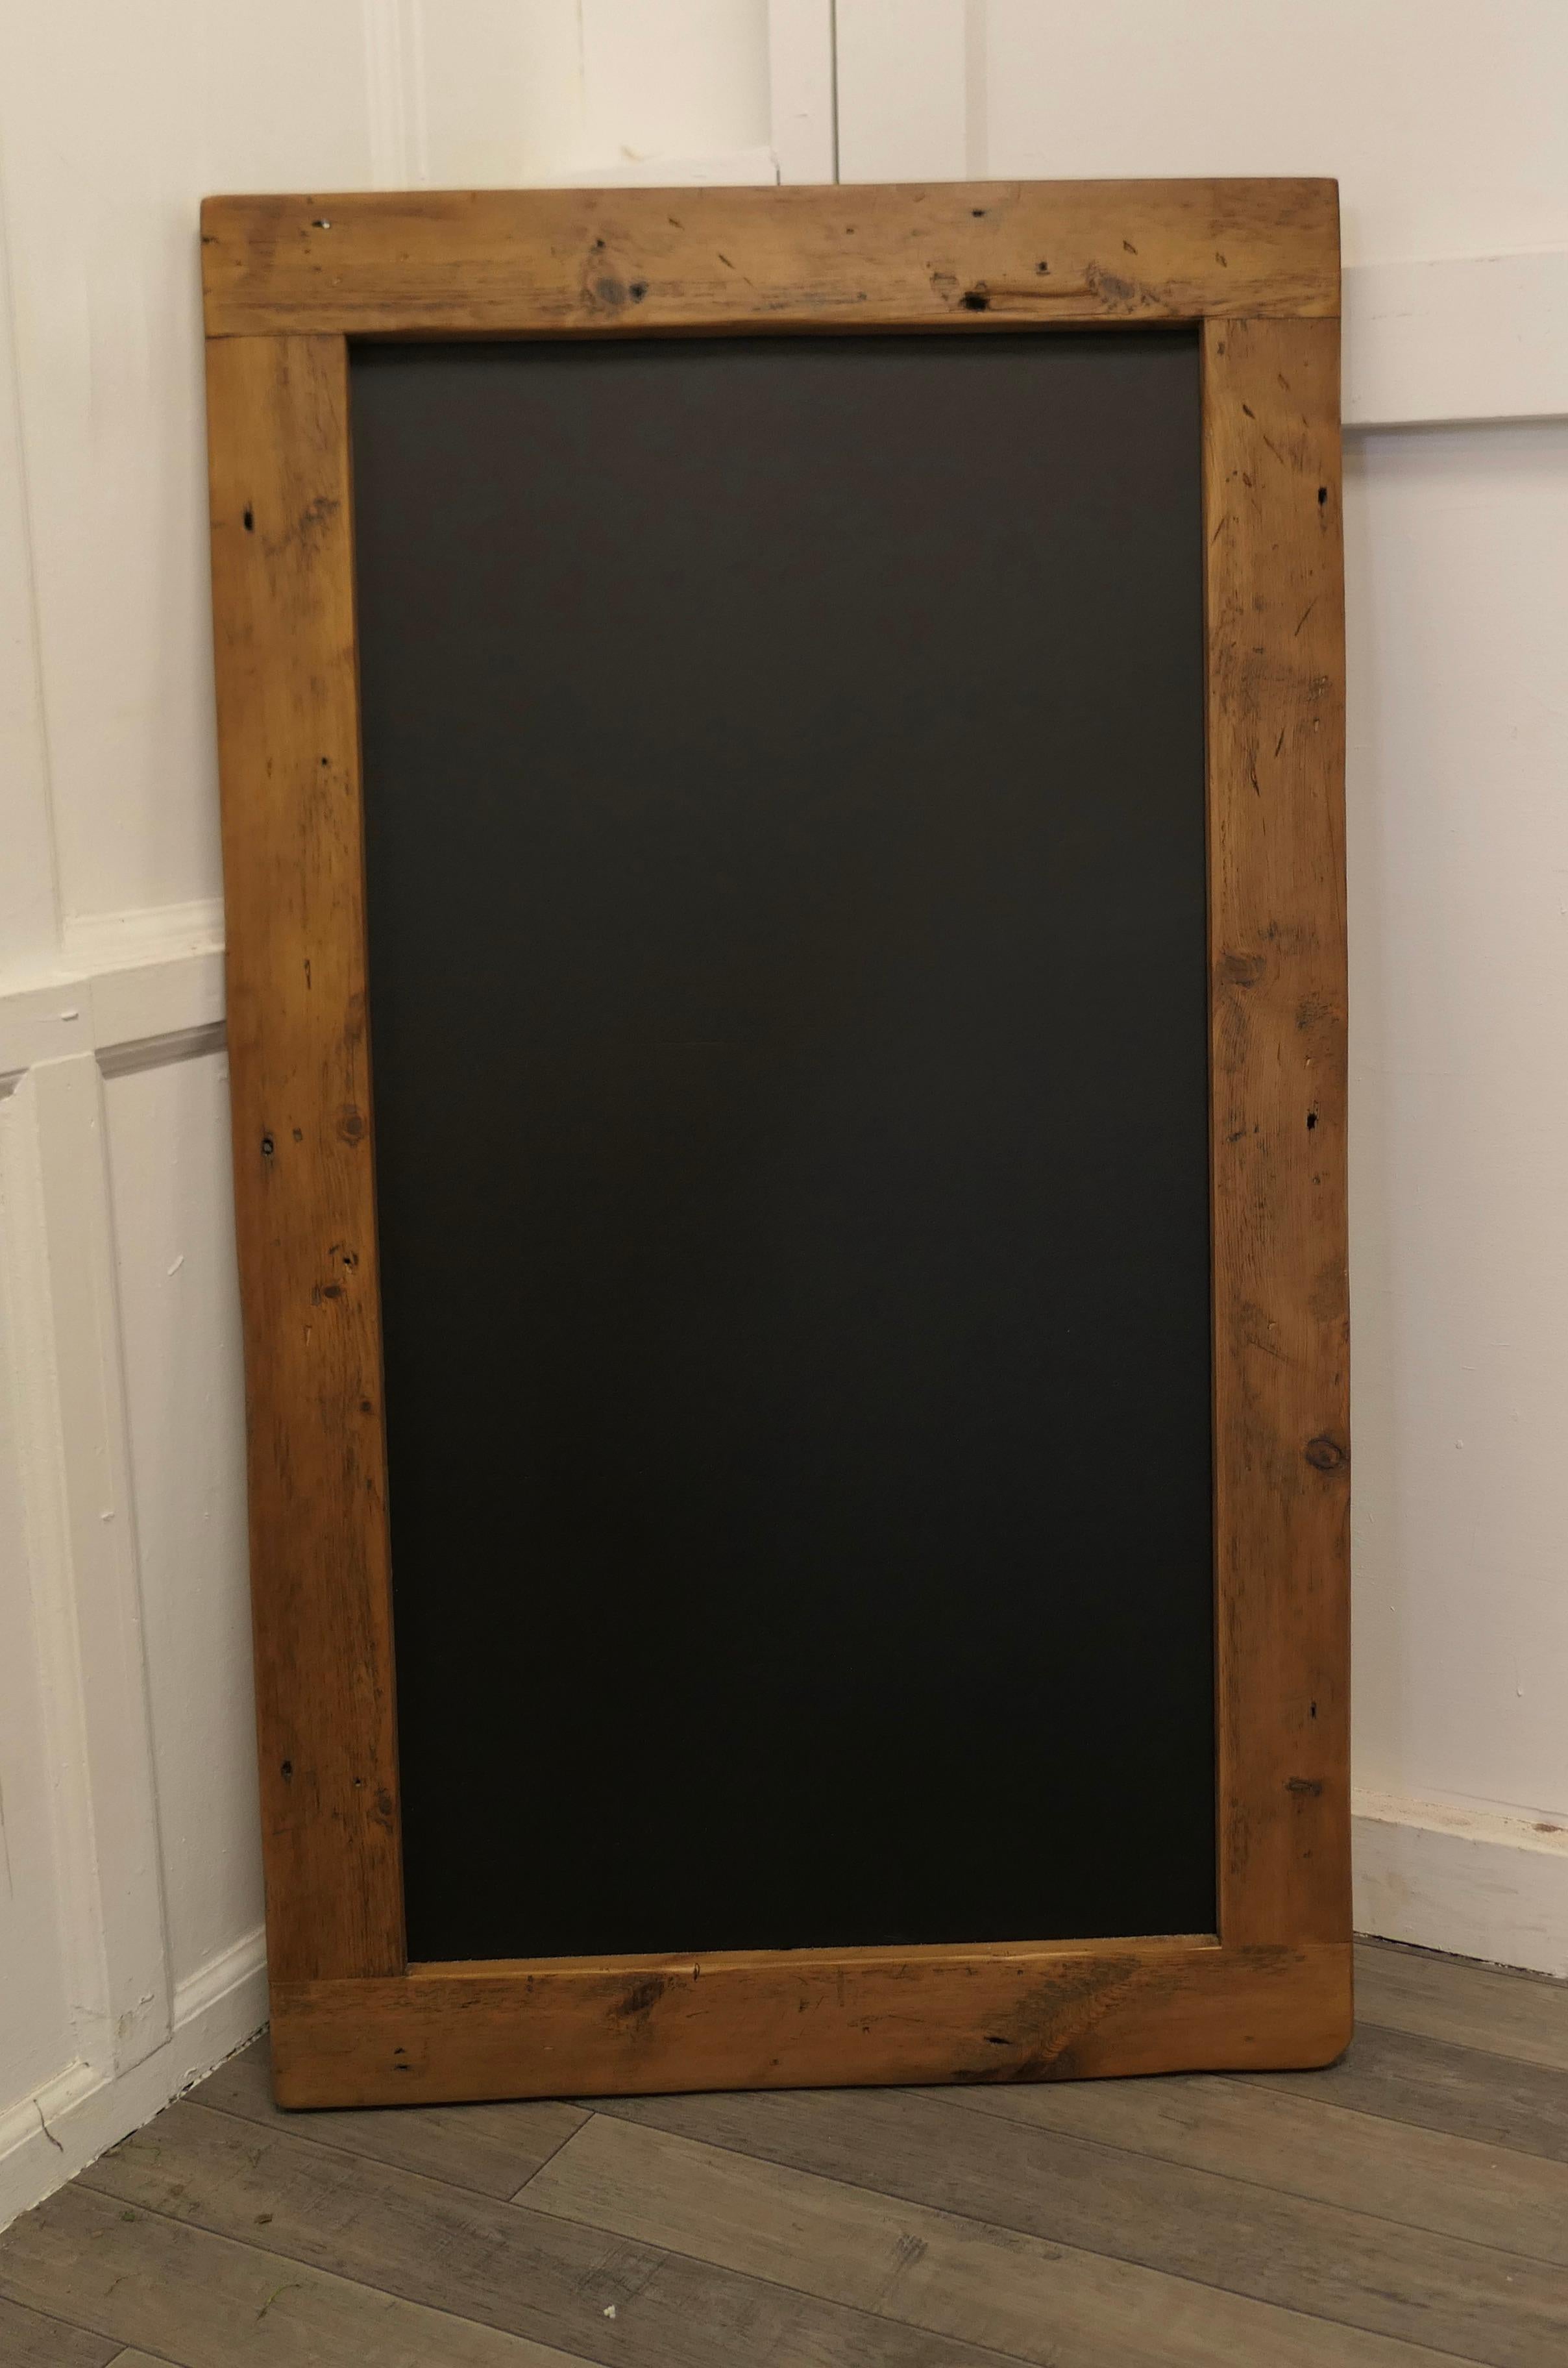 Recycled pine wine bar menu, black board

A good handsome piece simply made with 3.5” old pine and waxed and polished

The attractively bordered board is ready to write or paint your menu or specials straight on

The wood is old and reclaimed